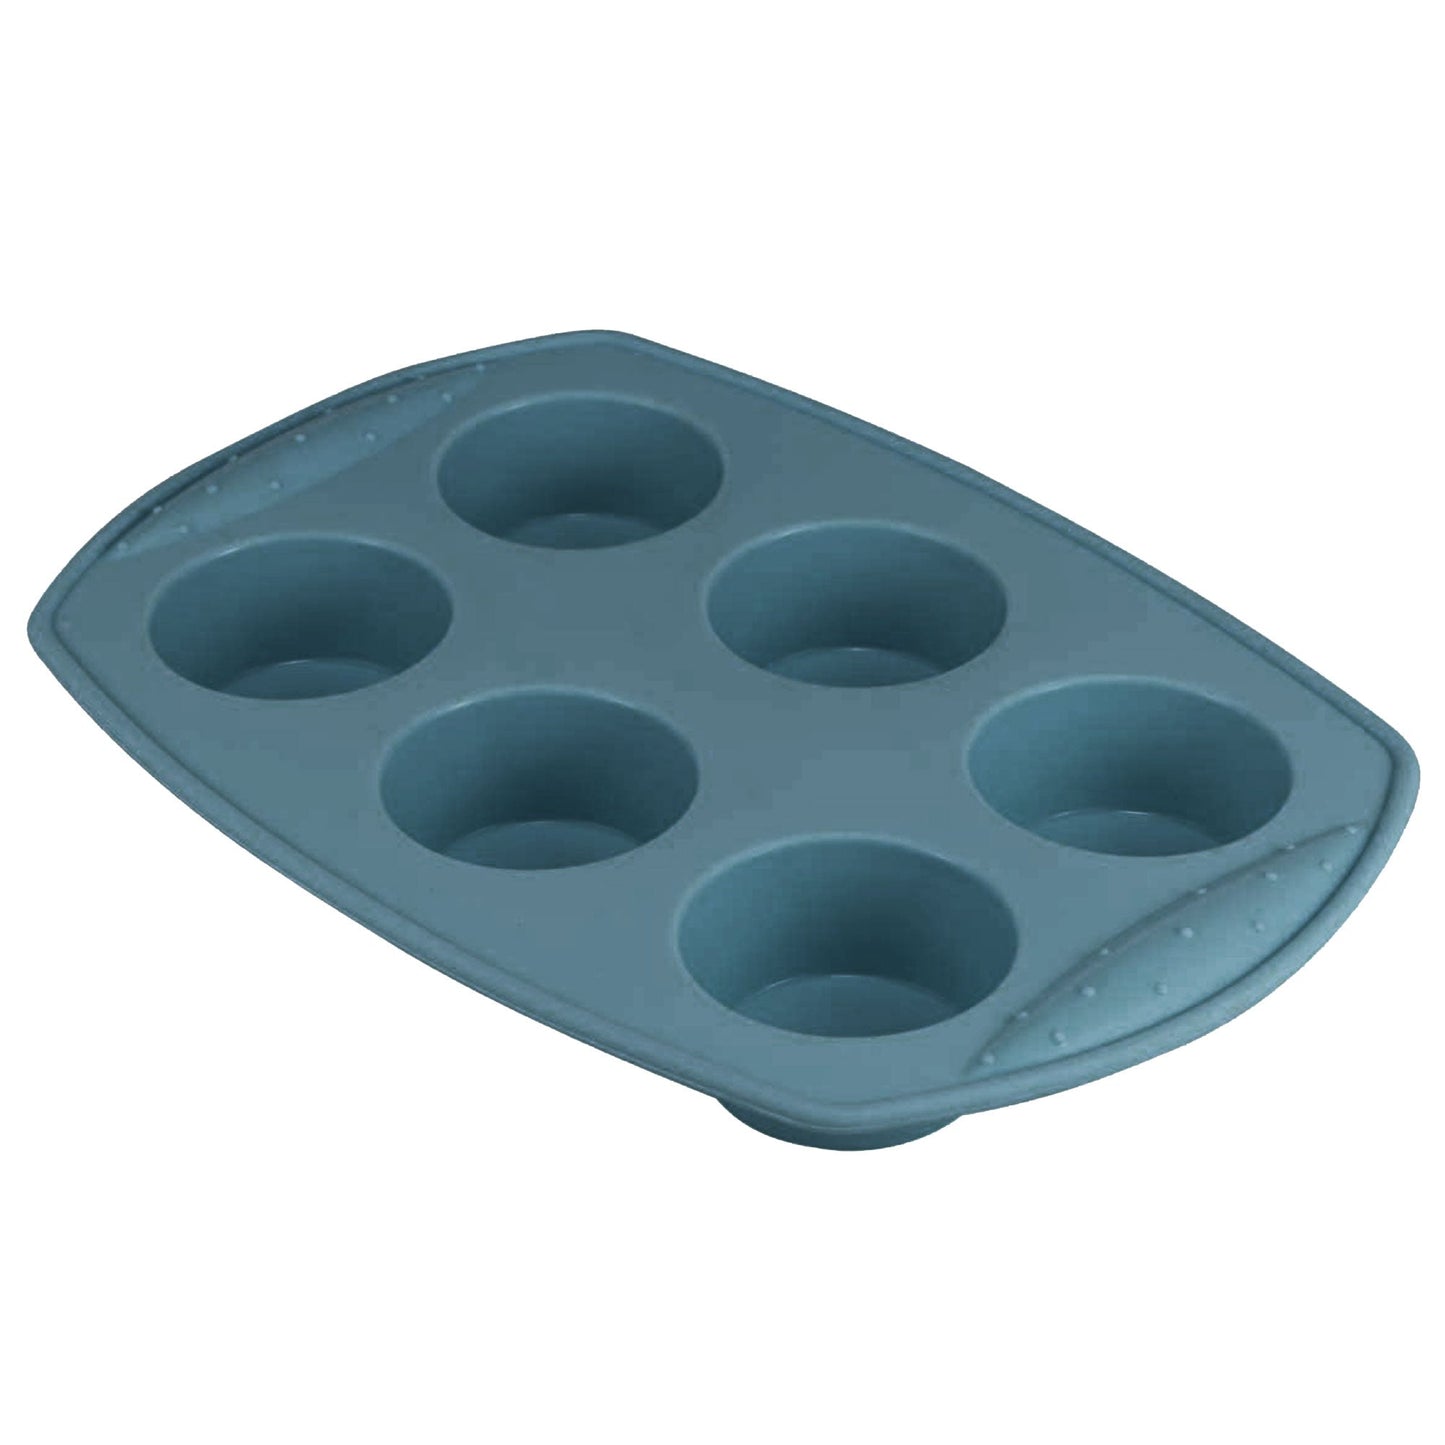 6 Cups Silicone Muffin Baking Tray